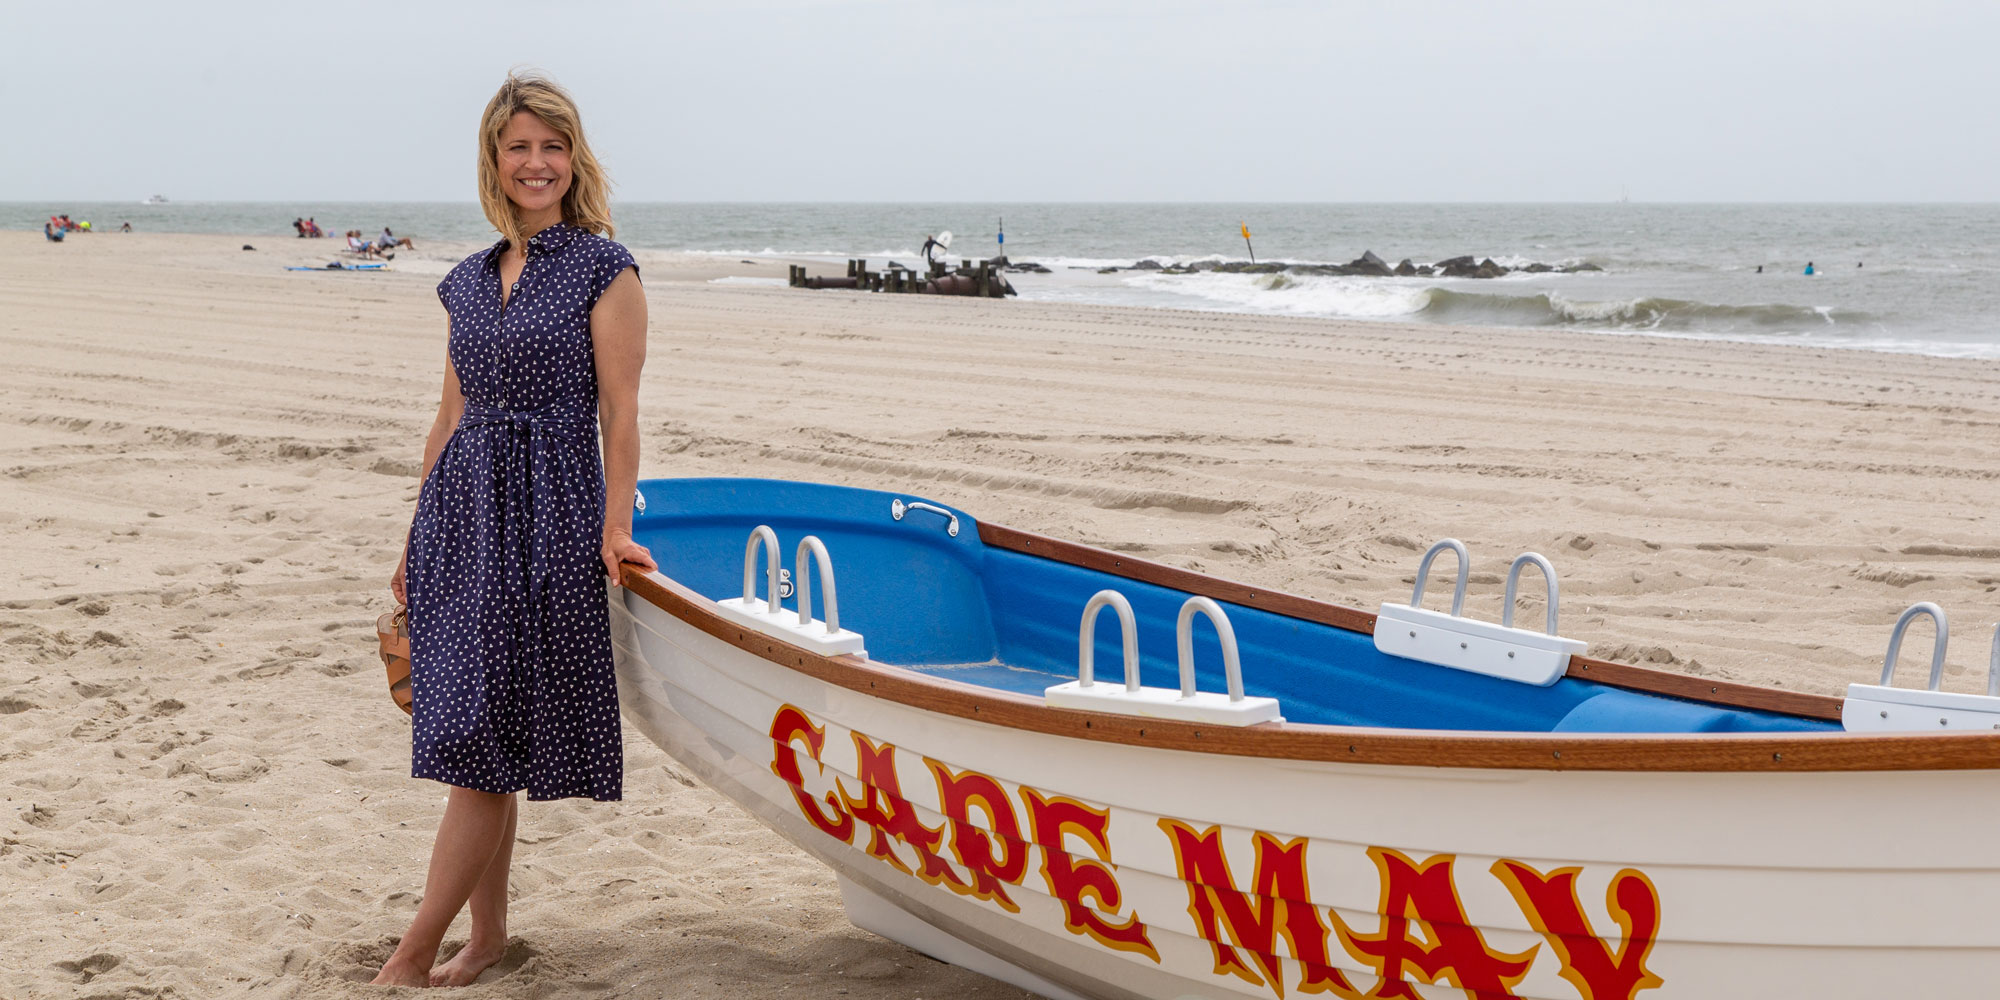 Cape May Beach - Jersey Shore - Samantha Brown Places to Love